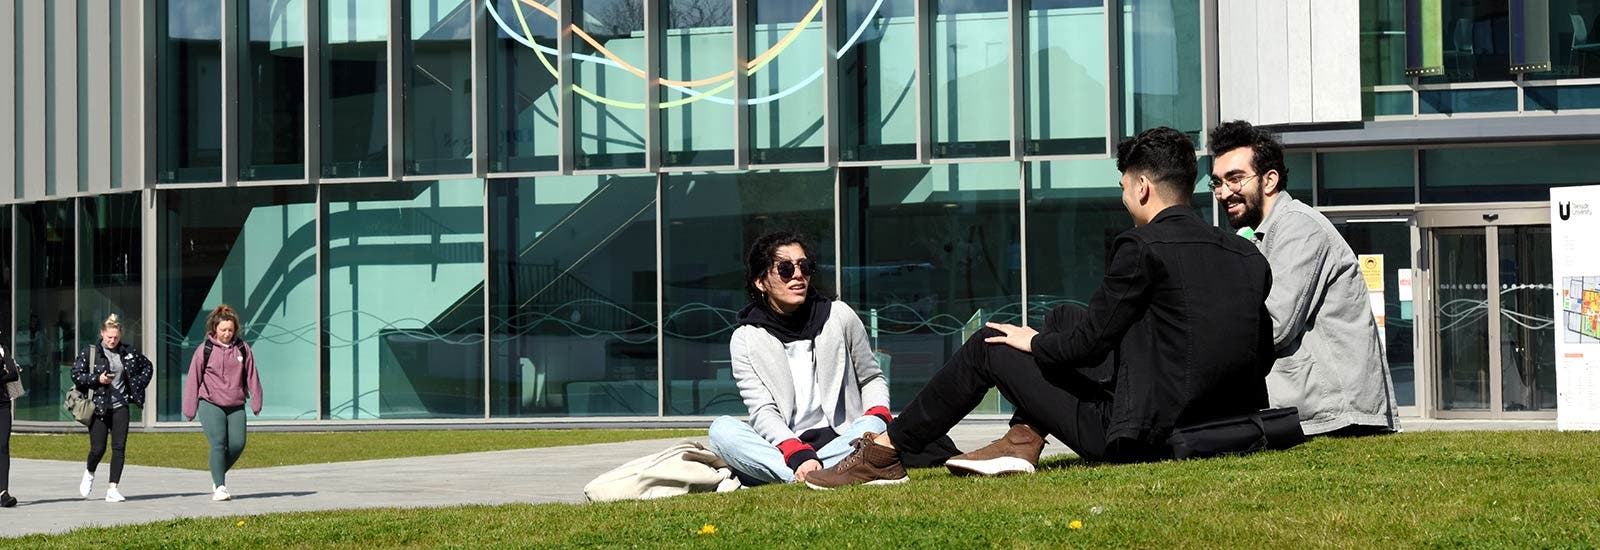 Students sitting on grass outside Teesside University campus